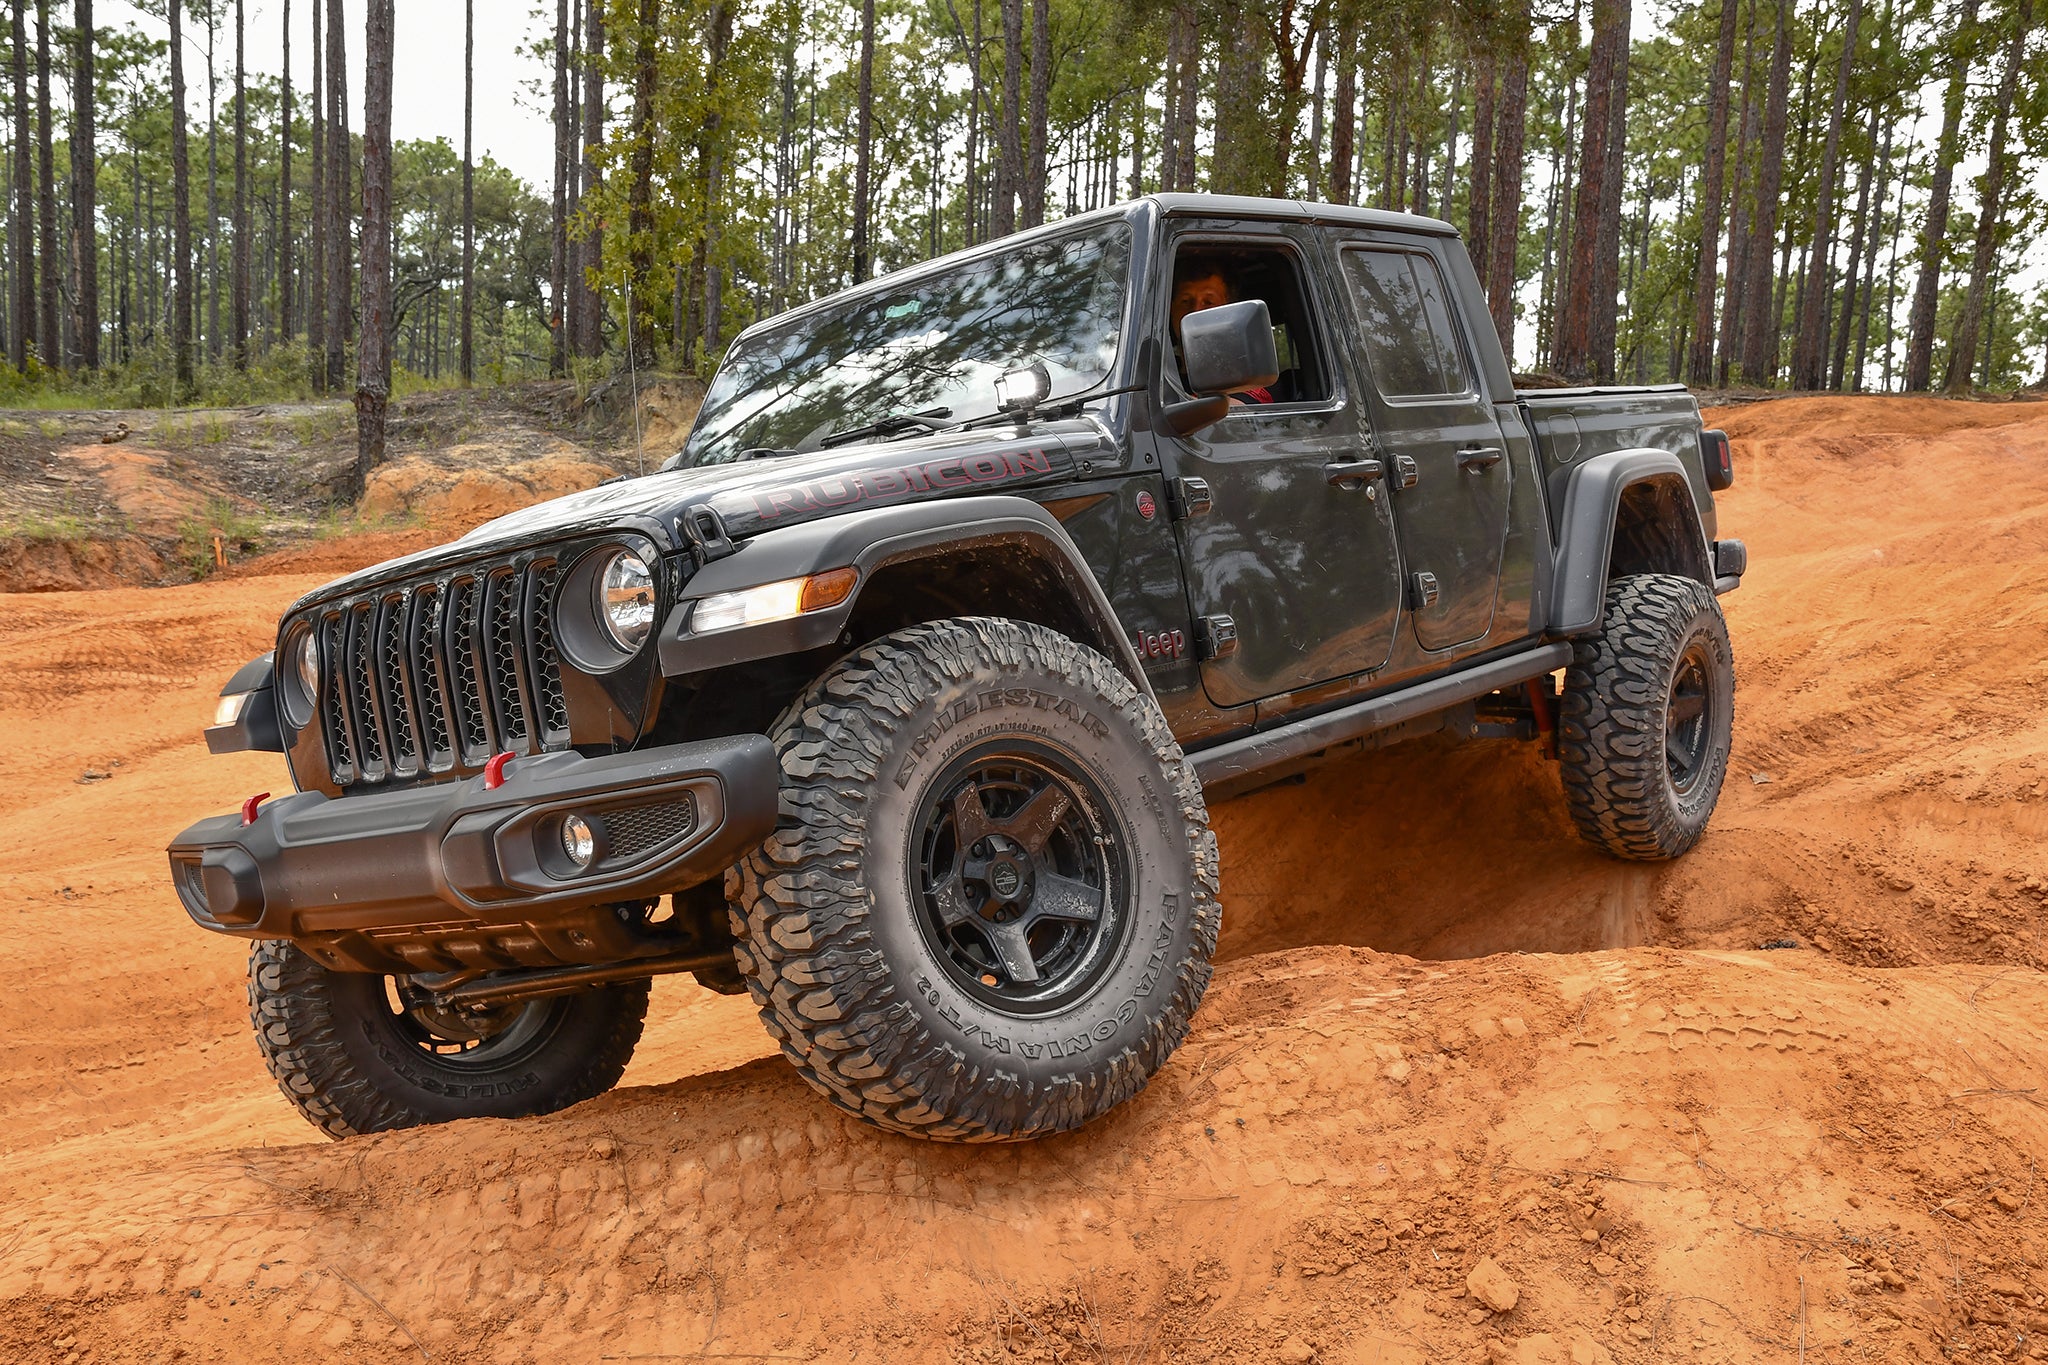 overland sector wheels jeep gladiator rubicon on 17x9 satin black atlas wheels on clay red dirt trail in woods